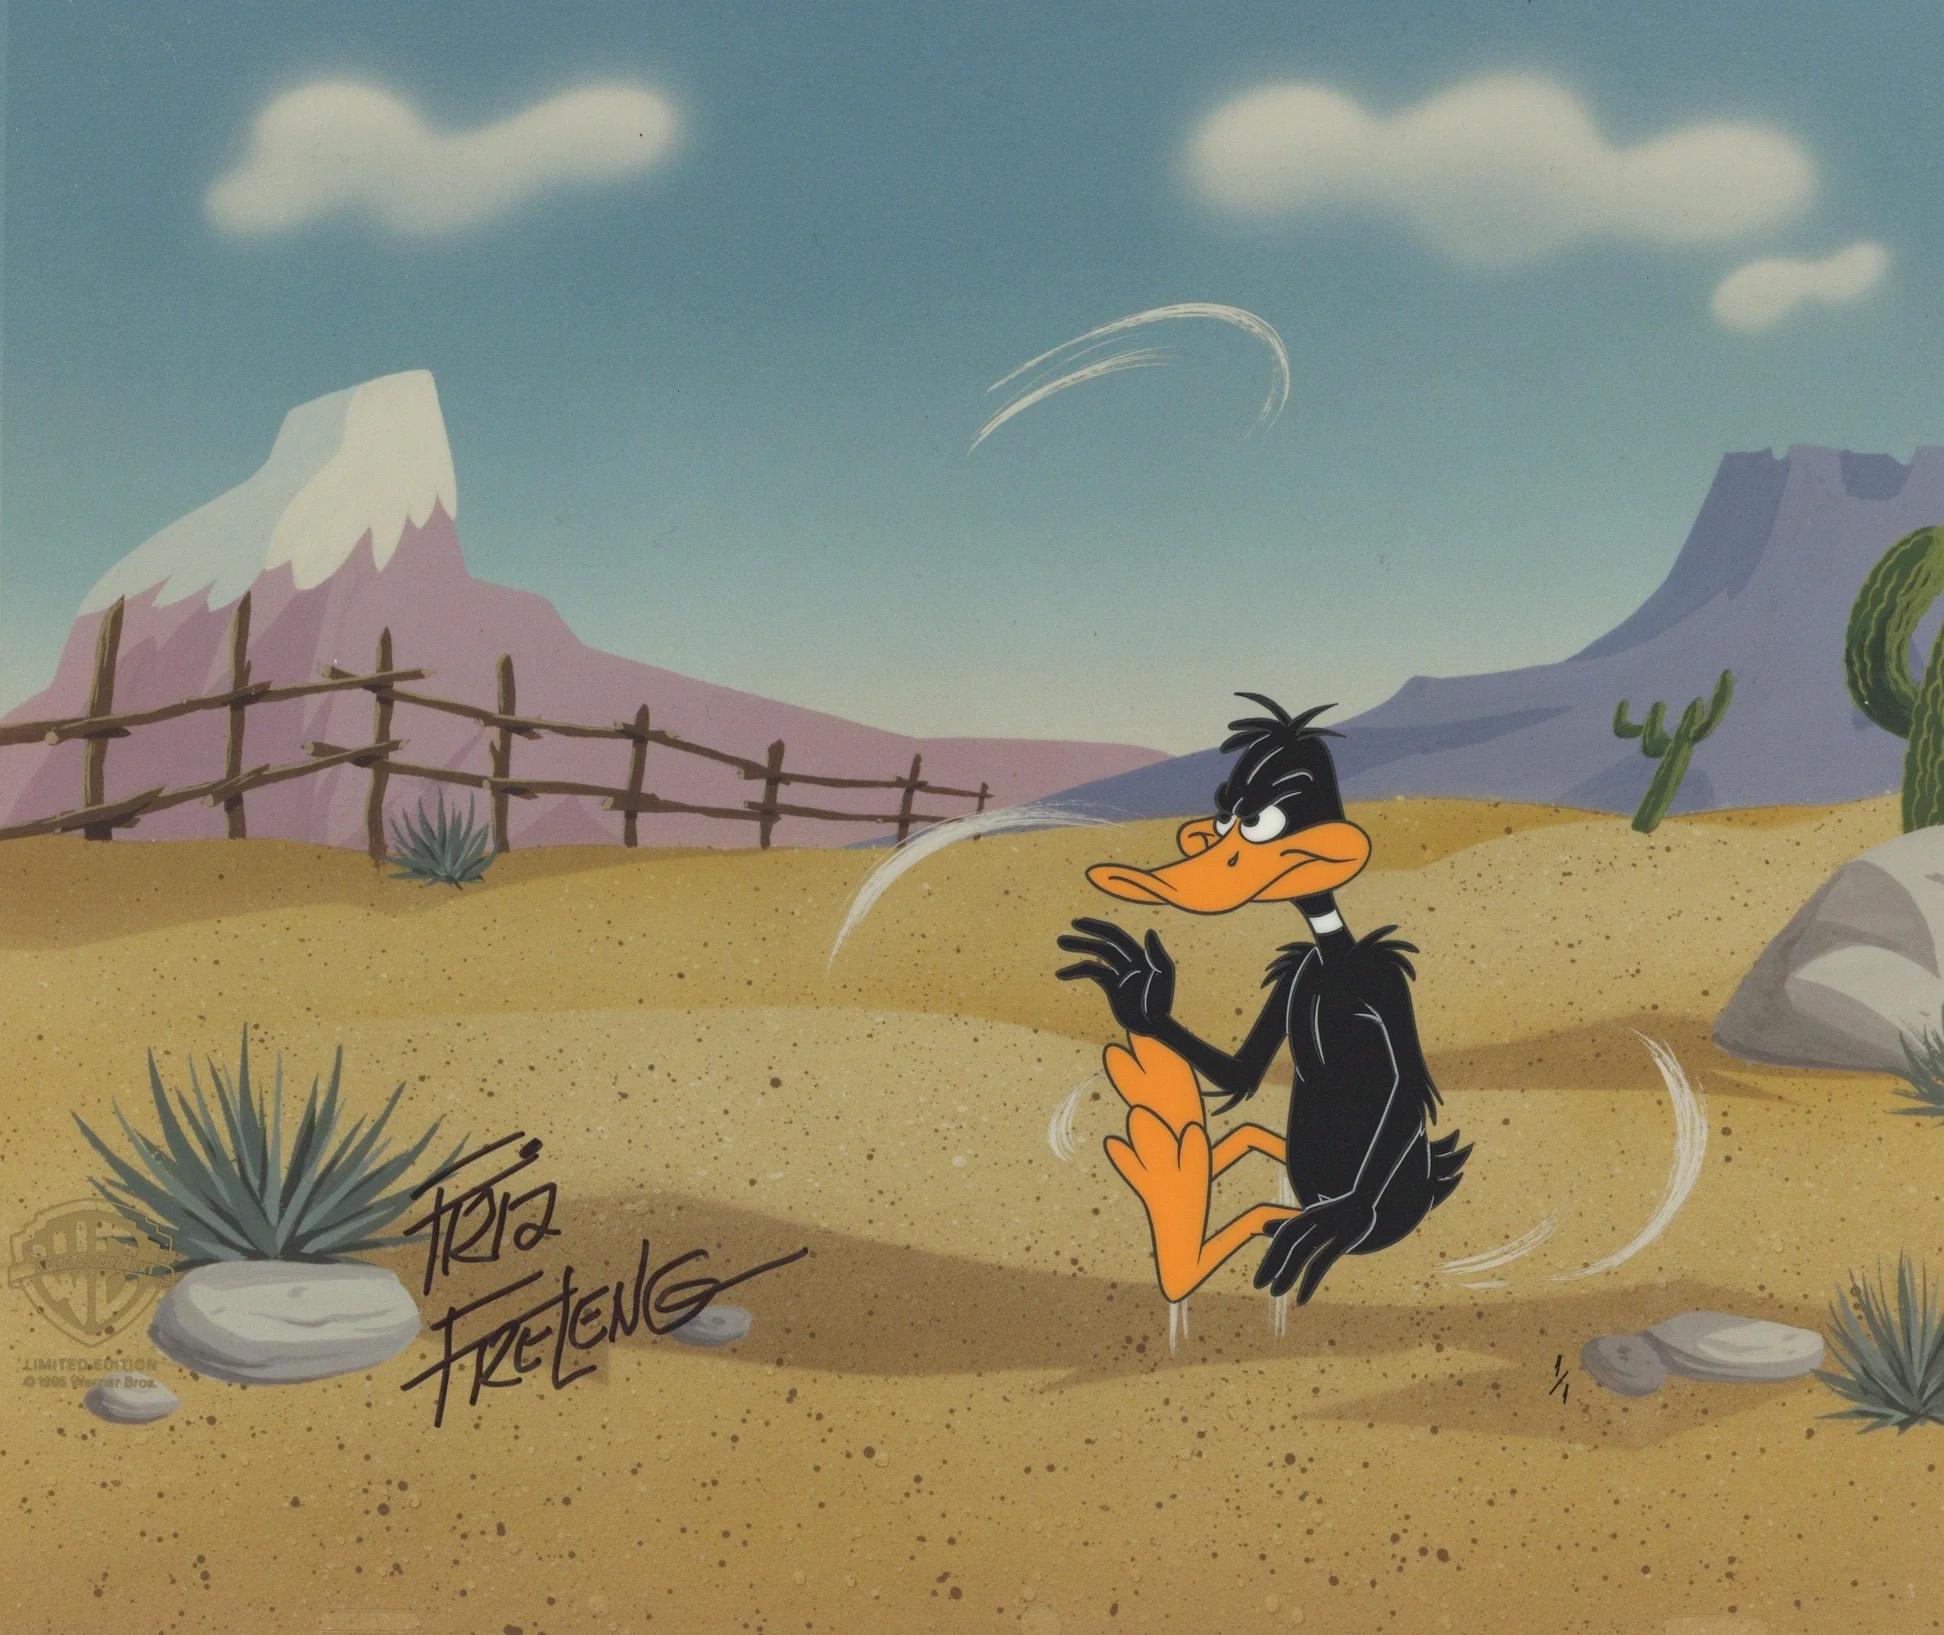 Looney Tunes Original Production Cel with Matching Drawing: Daffy Duck